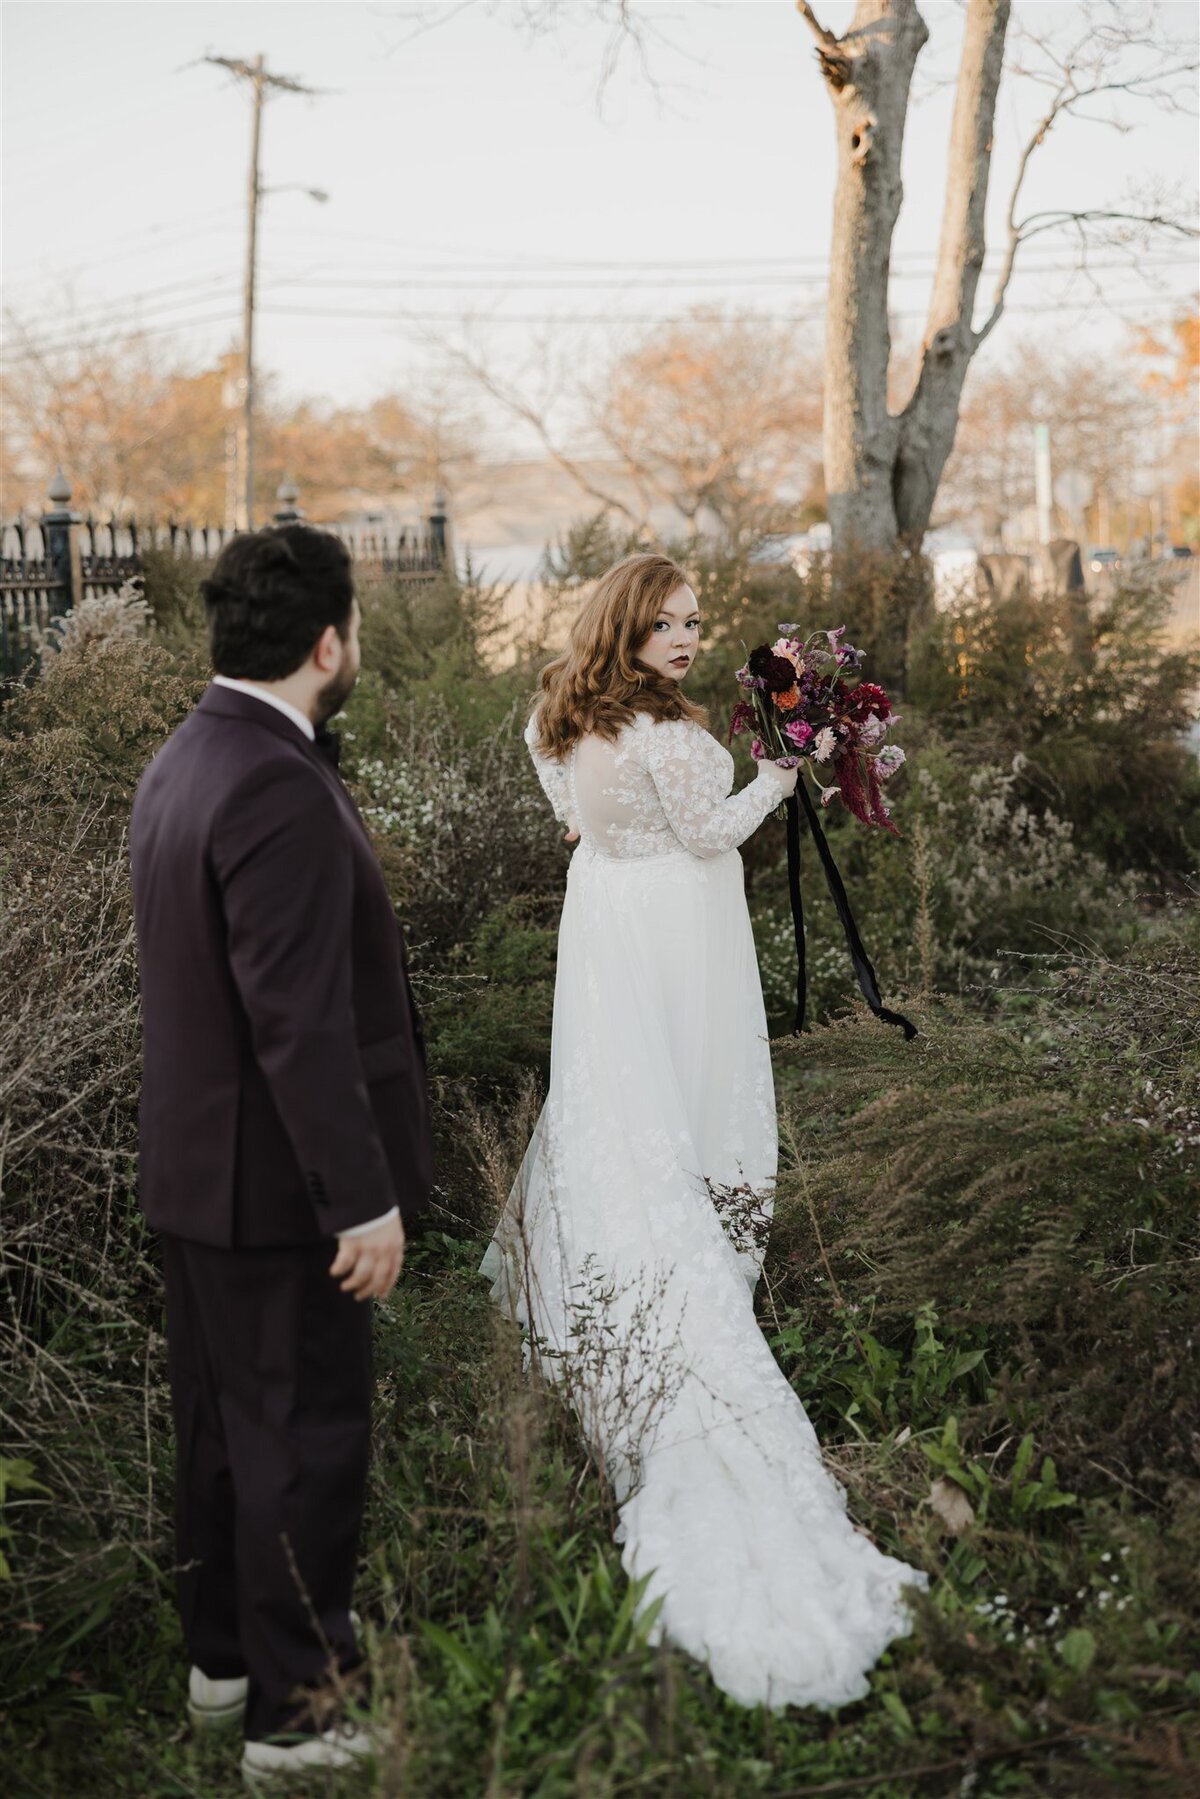 Outdoor fall wedding portraits in New Jersey